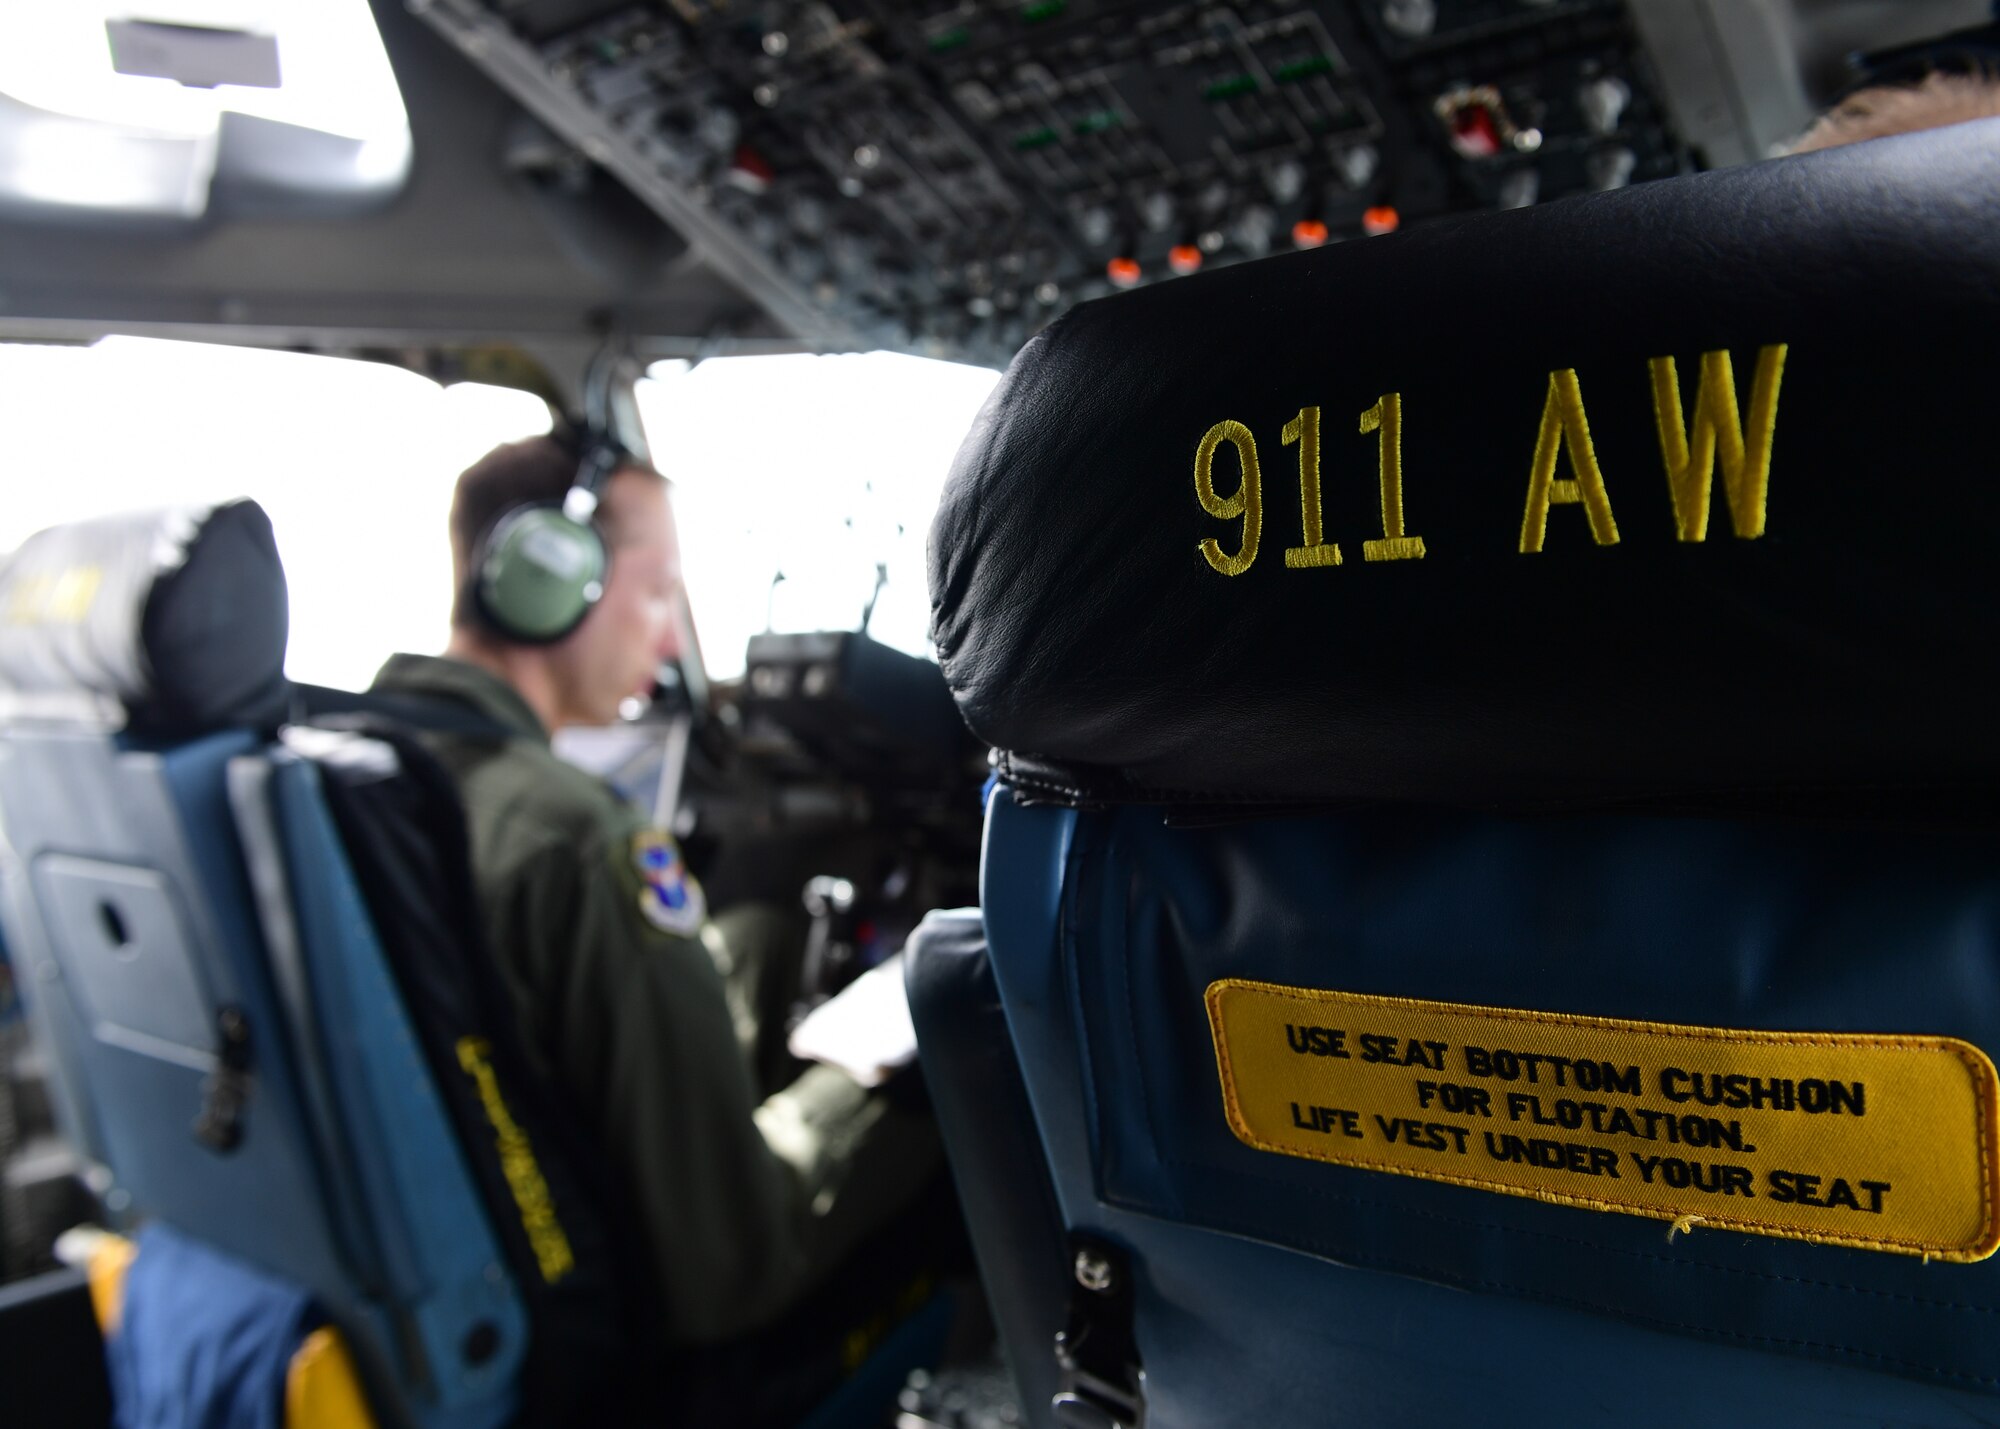 Lt. Col. Tom Clark, pilot with the 758th Airlift Squadron, prepares for takeoff at the Pittsburgh International Airport Air Reserve Station, Pennsylvania, April 11, 2019. Their mission was to go to Dobbins Air Reserve Base, Georgia, to pick up an aircraft tug, which is used to move extremely heavy aircraft, which is used to move extremely heavy aircraft, for the C-17 Globemaster IIIs the 911th Airlift Wing.(U.S. Air Force Photo by Senior Airman Grace Thomson)